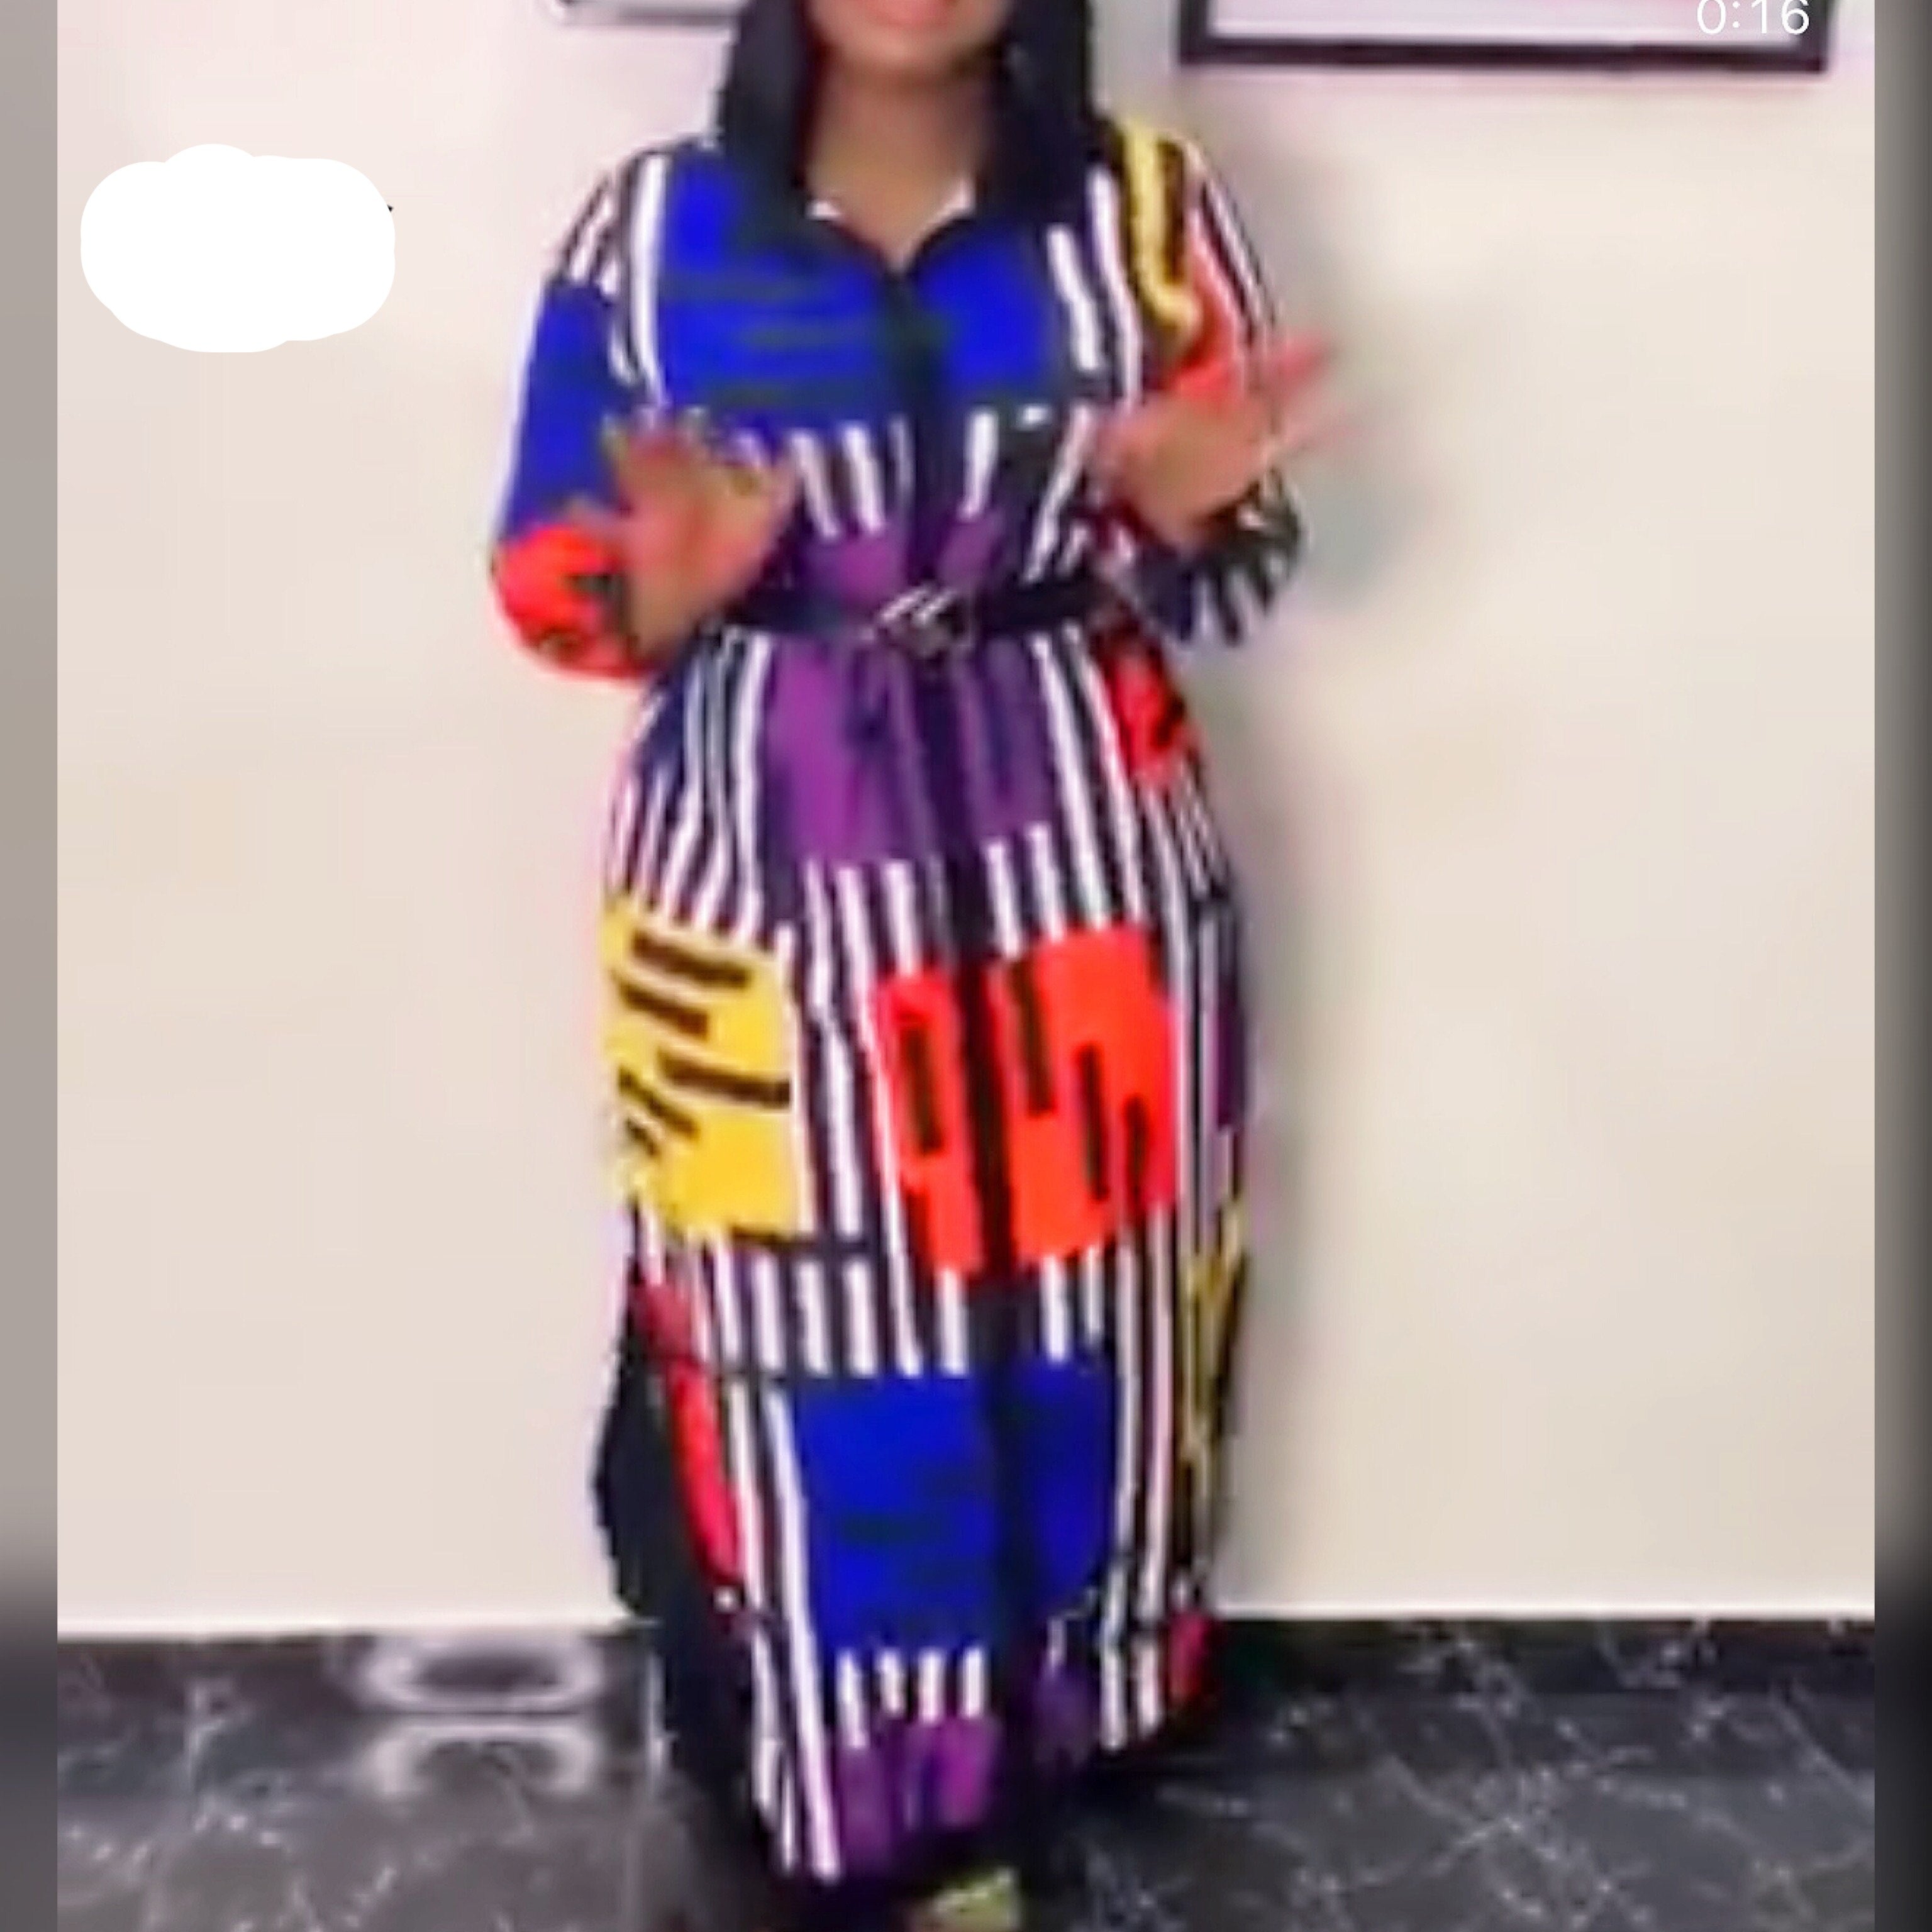 African-Inspired Chiffon Dashiki: A Stylish Twist on Traditional Party Attire - Flexi Africa - Flexi Africa offers Free Delivery Worldwide - Vibrant African traditional clothing showcasing bold prints and intricate designs